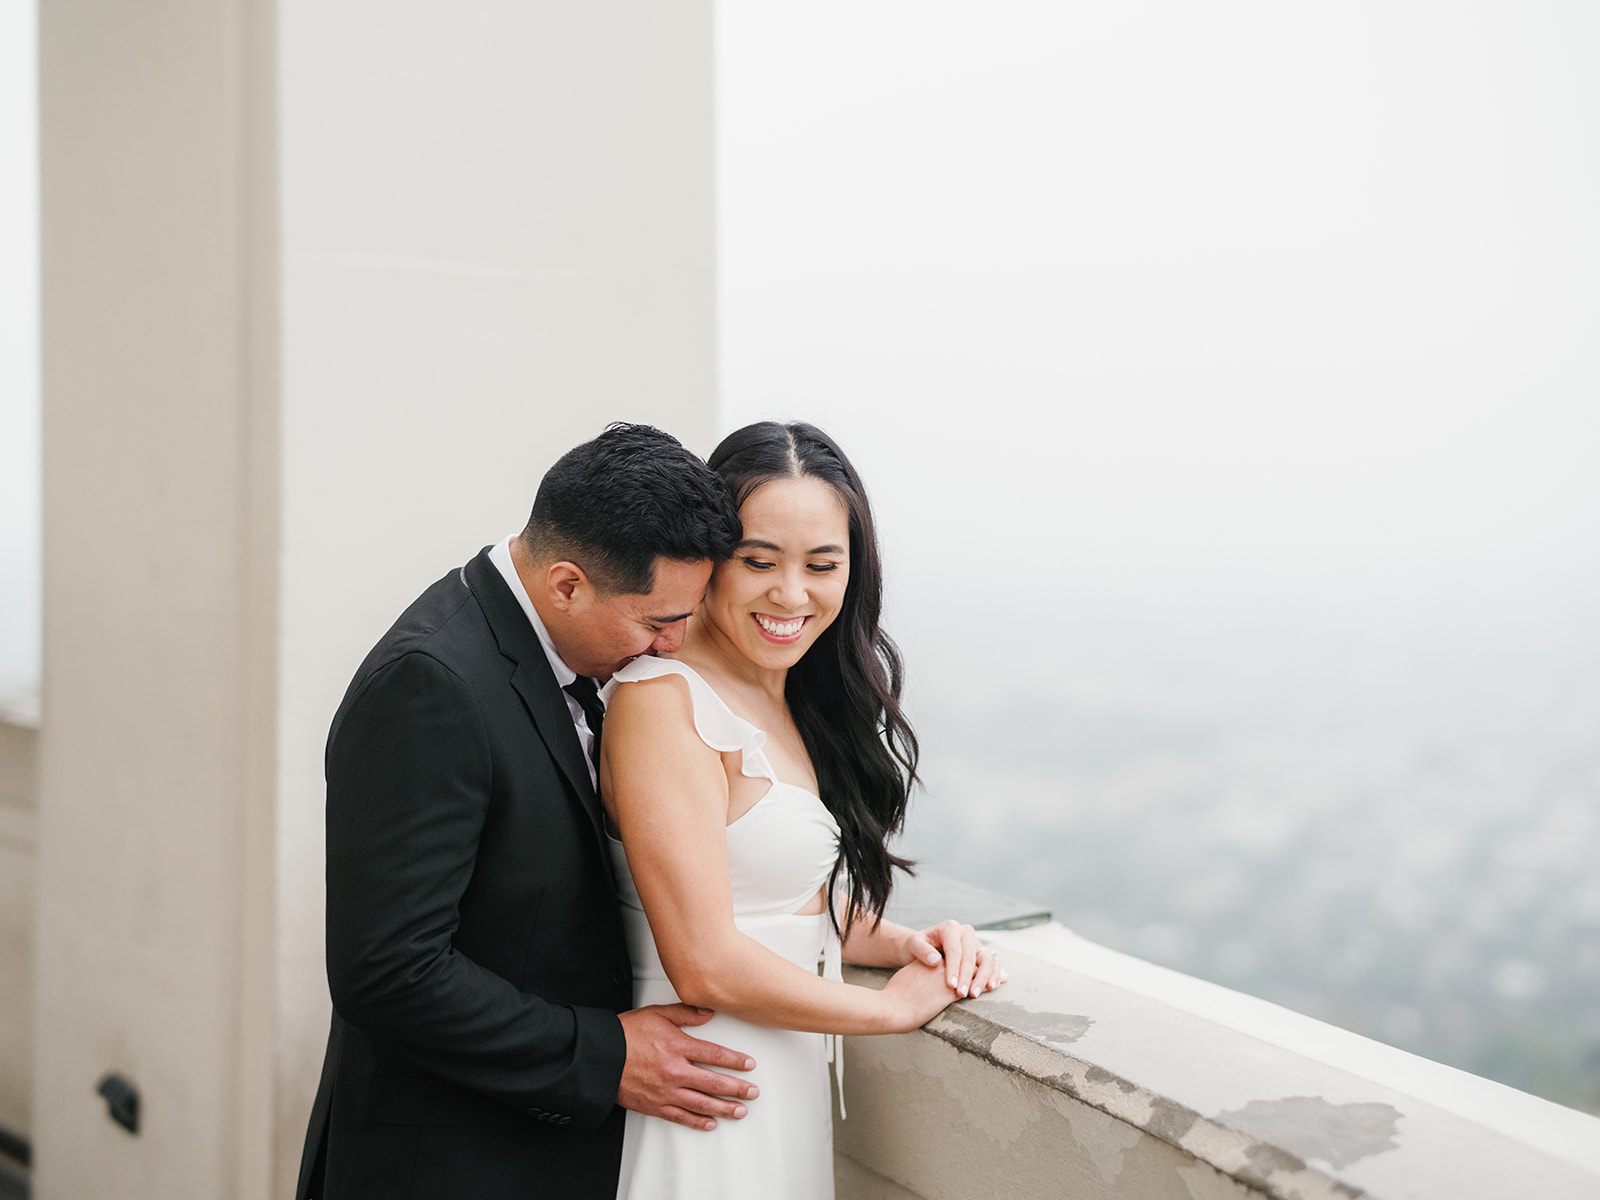 Griffith Observatory Engagement